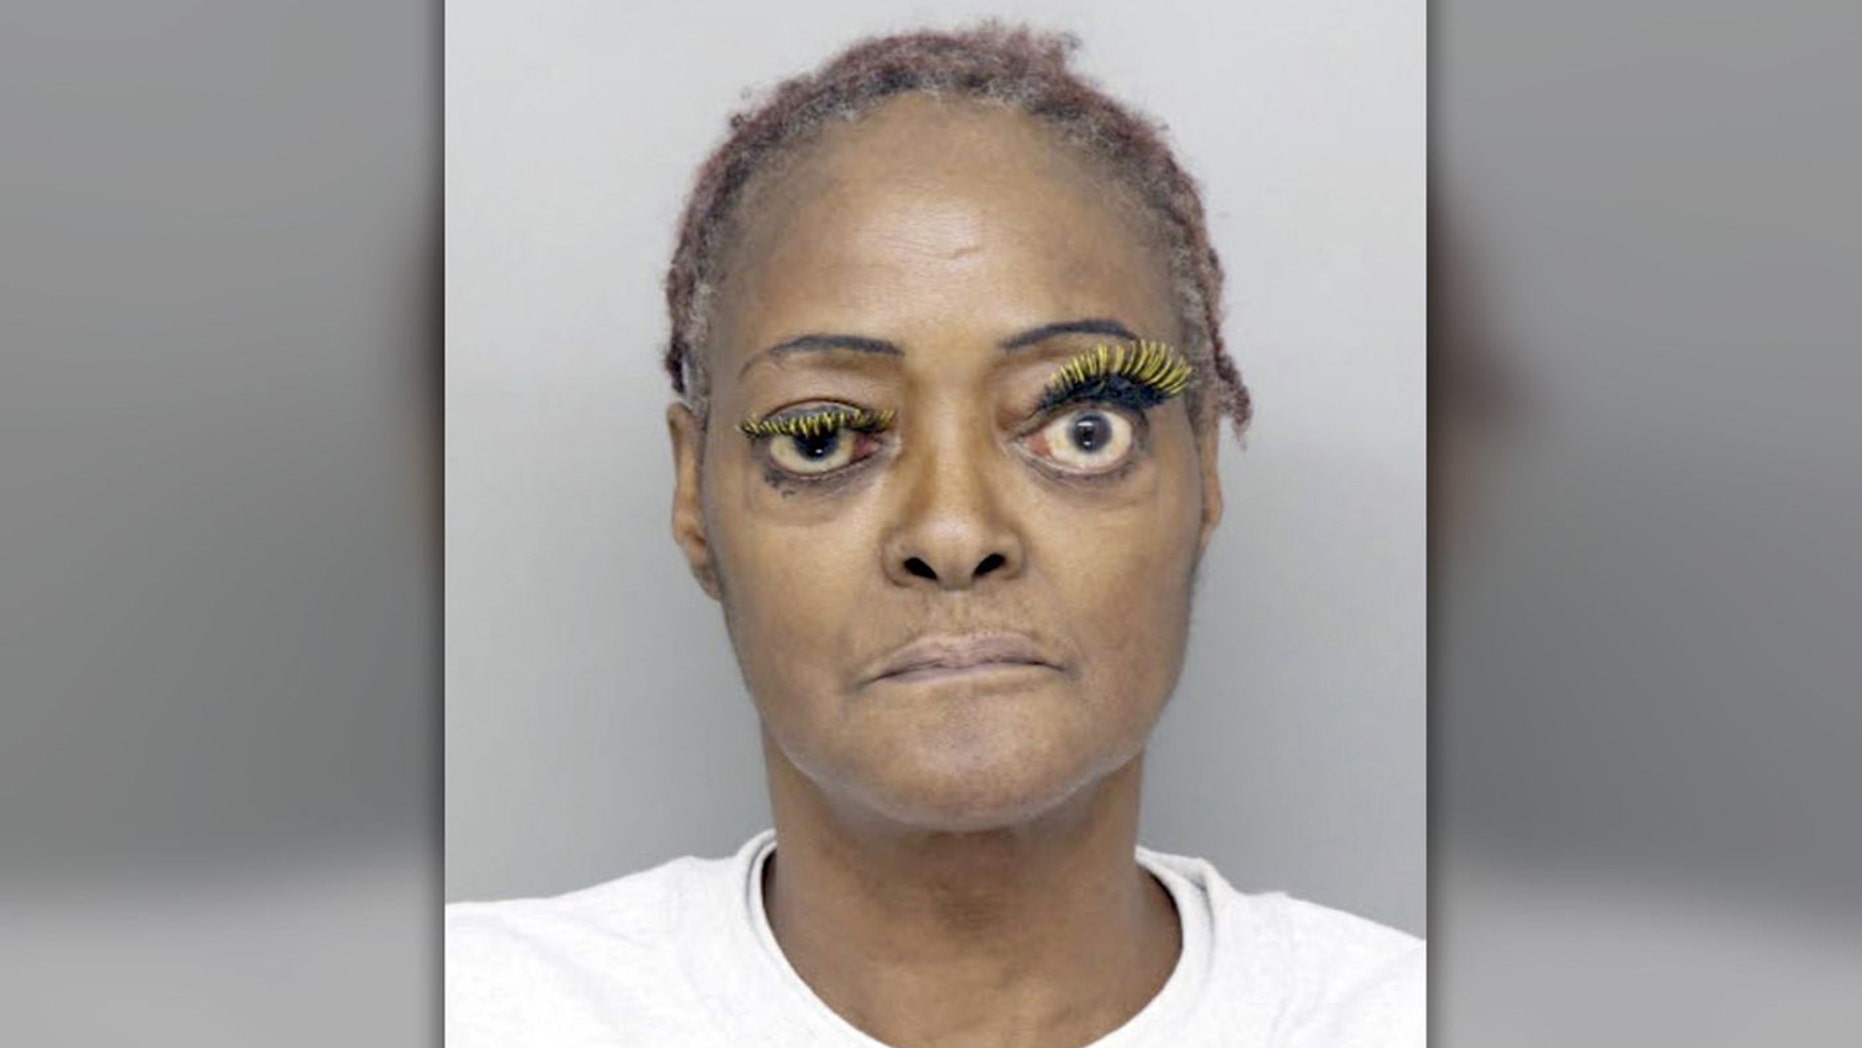 Charlene Thompson, 61, allegedly poured hot grease on a someone during an argument.